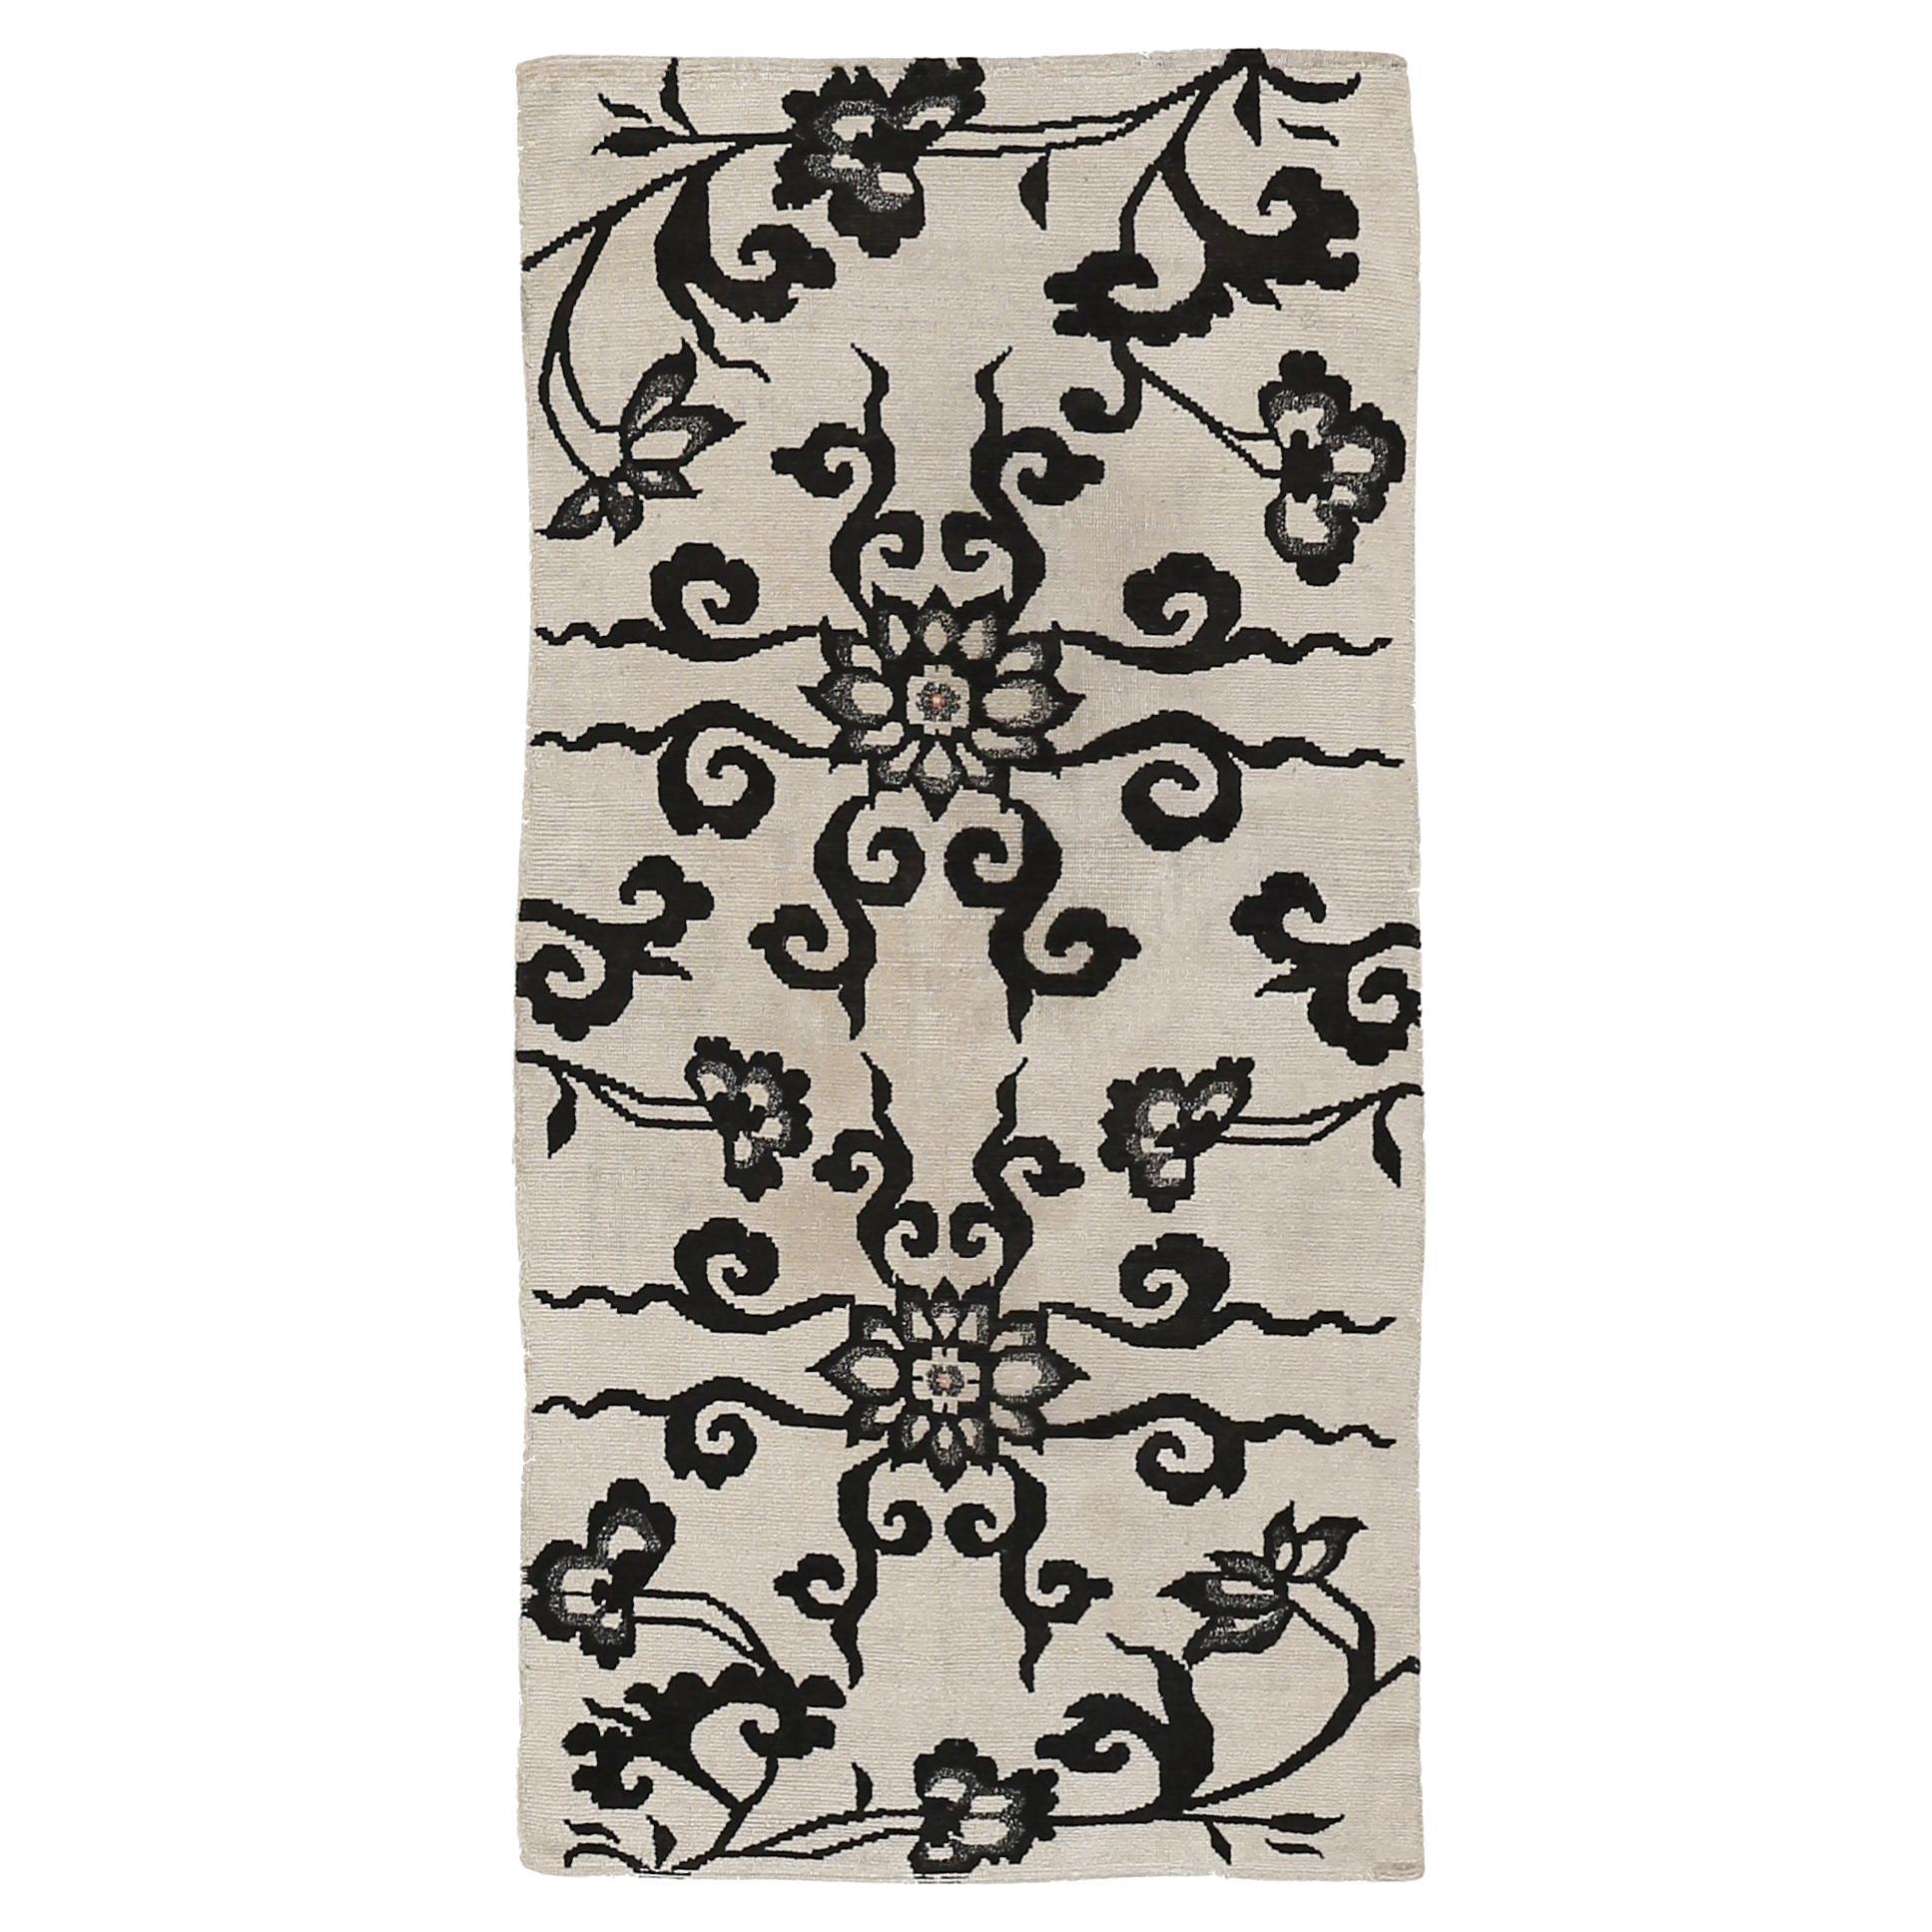 Antique White Ground Tibetan Khaden Rug with Black Lotus Flowers and Tendrils